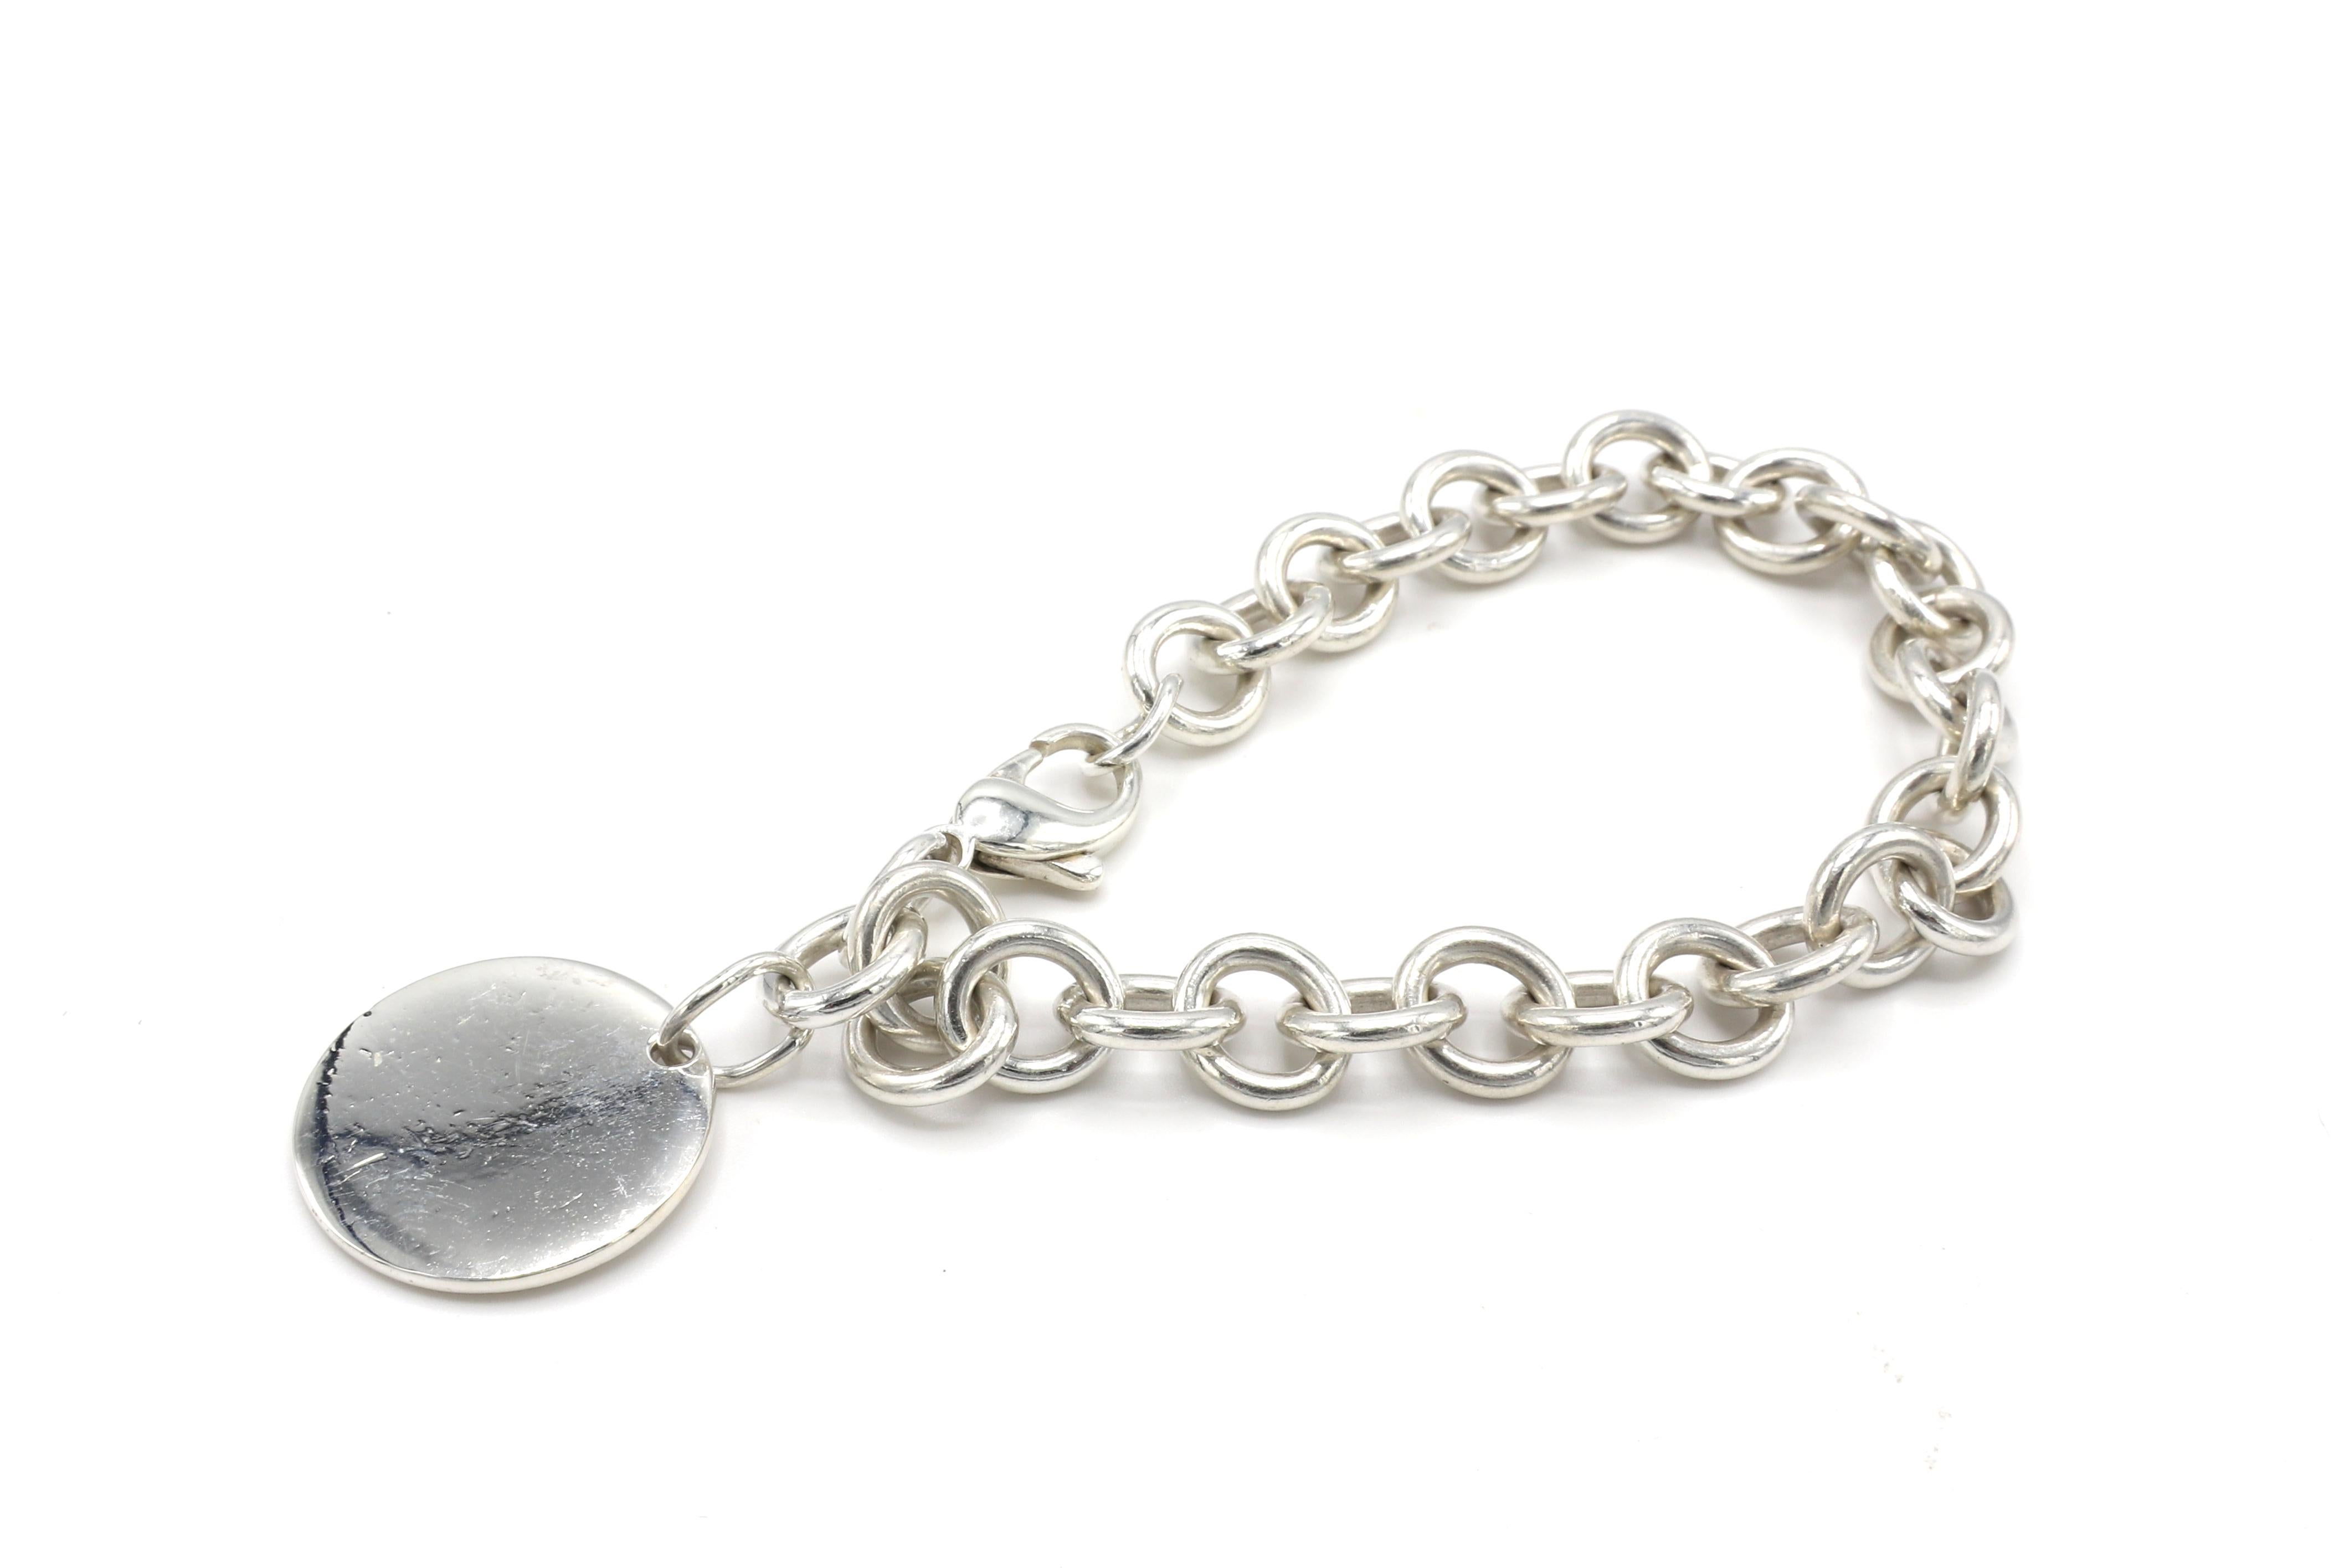 Tiffany & Co. Return to Tiffany Sterling Silver Disc Charm Link Bracelet 
Metal: Sterling silver 925
Weight: 38.6 grams
Length: 8.5 inches
Pendant diameter: 23.5 MM
Signed: Please Return to Tiffany & Co. New York 925
Condition: Slight scratches to